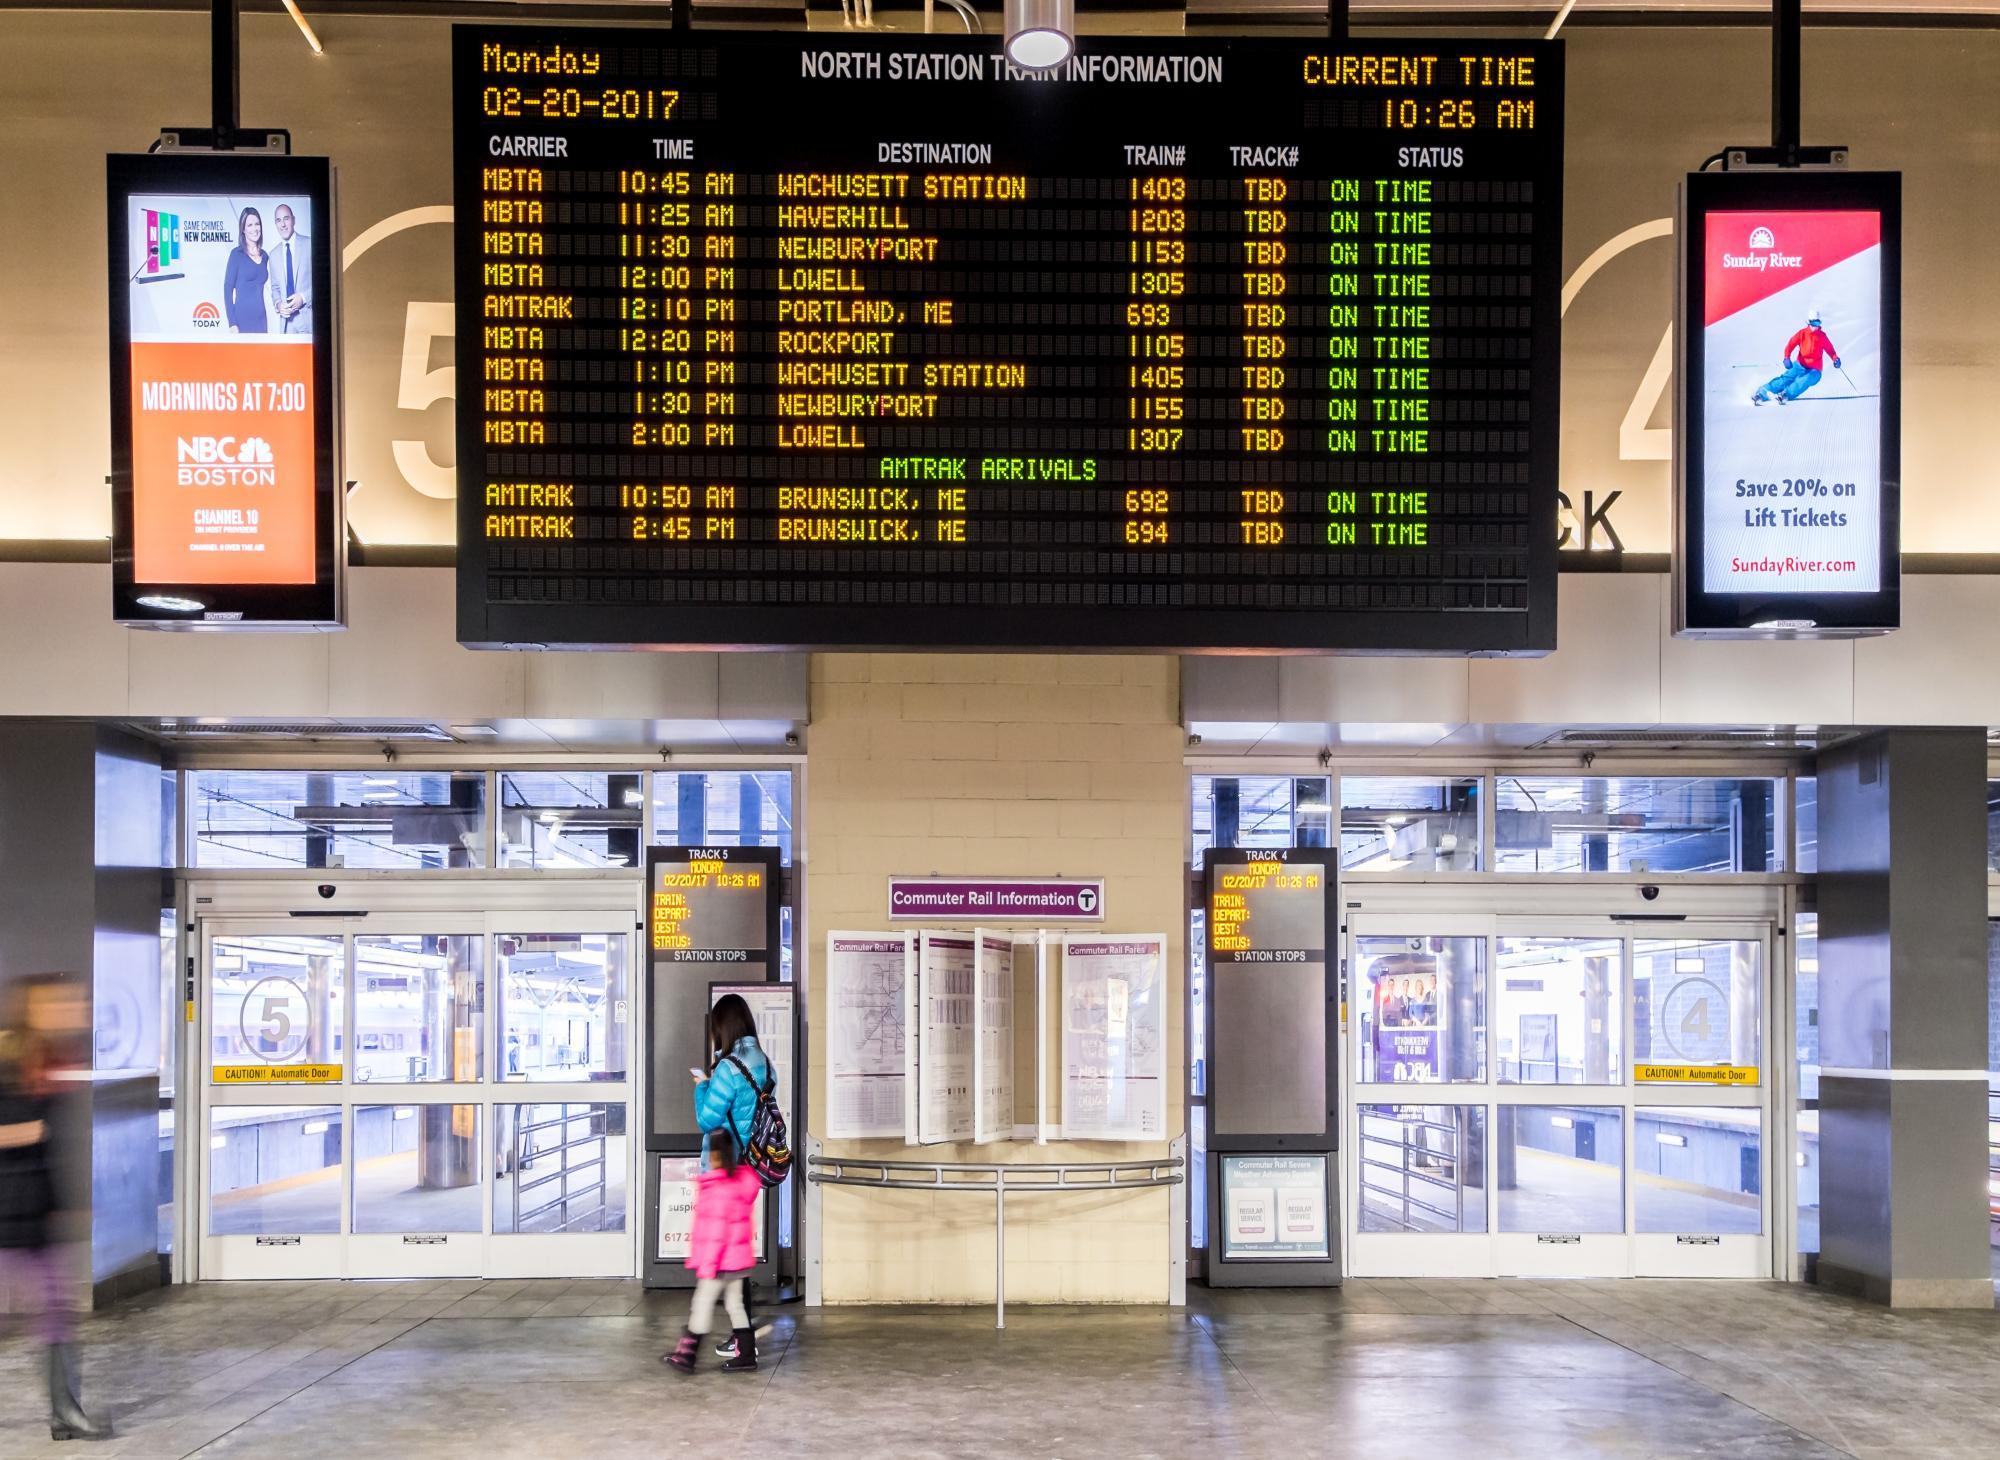 departures board at north station